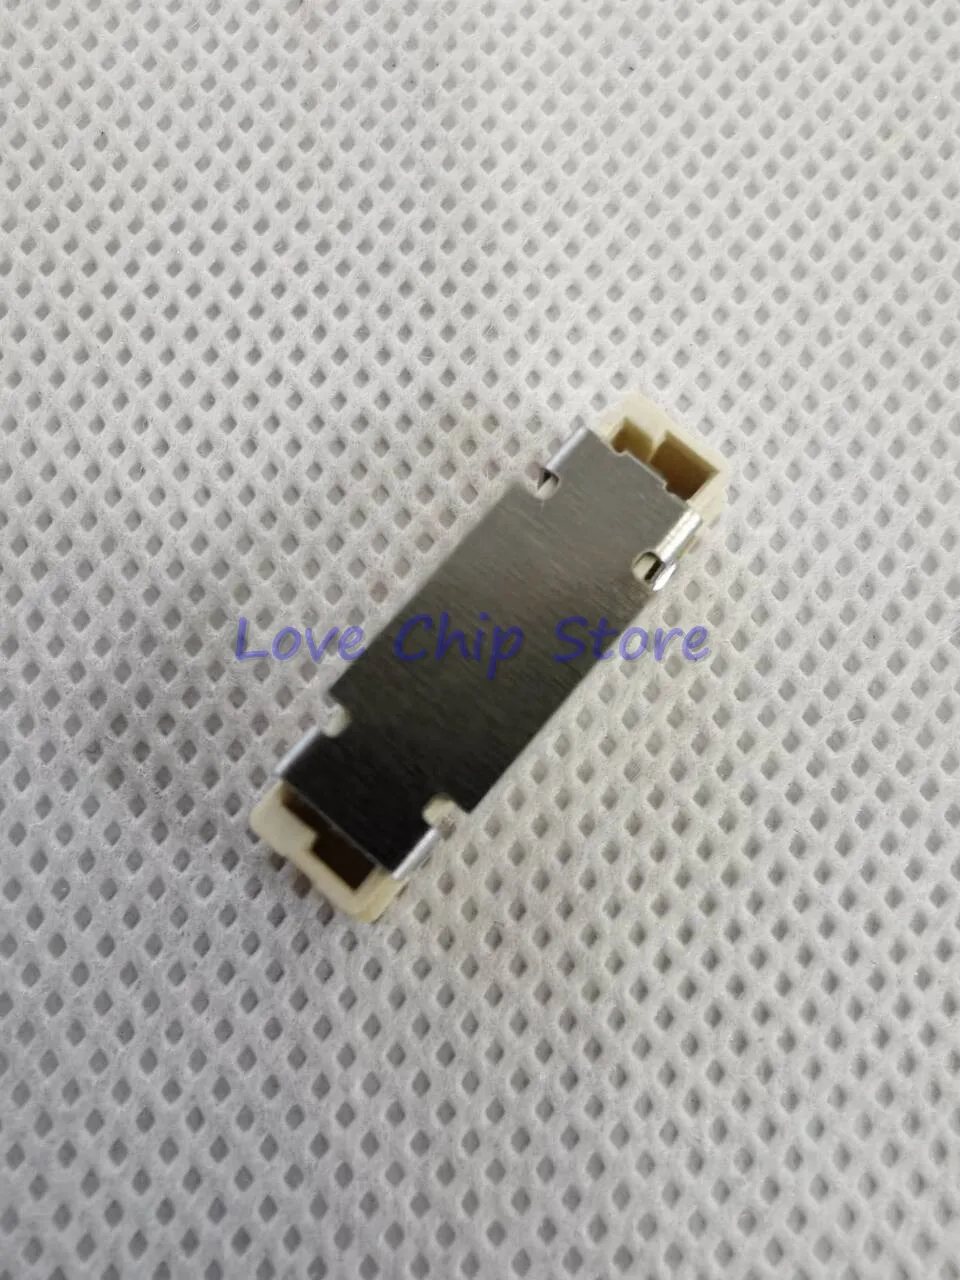 5179030-1 1-5179030-1 Spacing (0.8MM) H=6.6mm Board to Board & Mezzanine Connectors 40P 40PIN New and Original